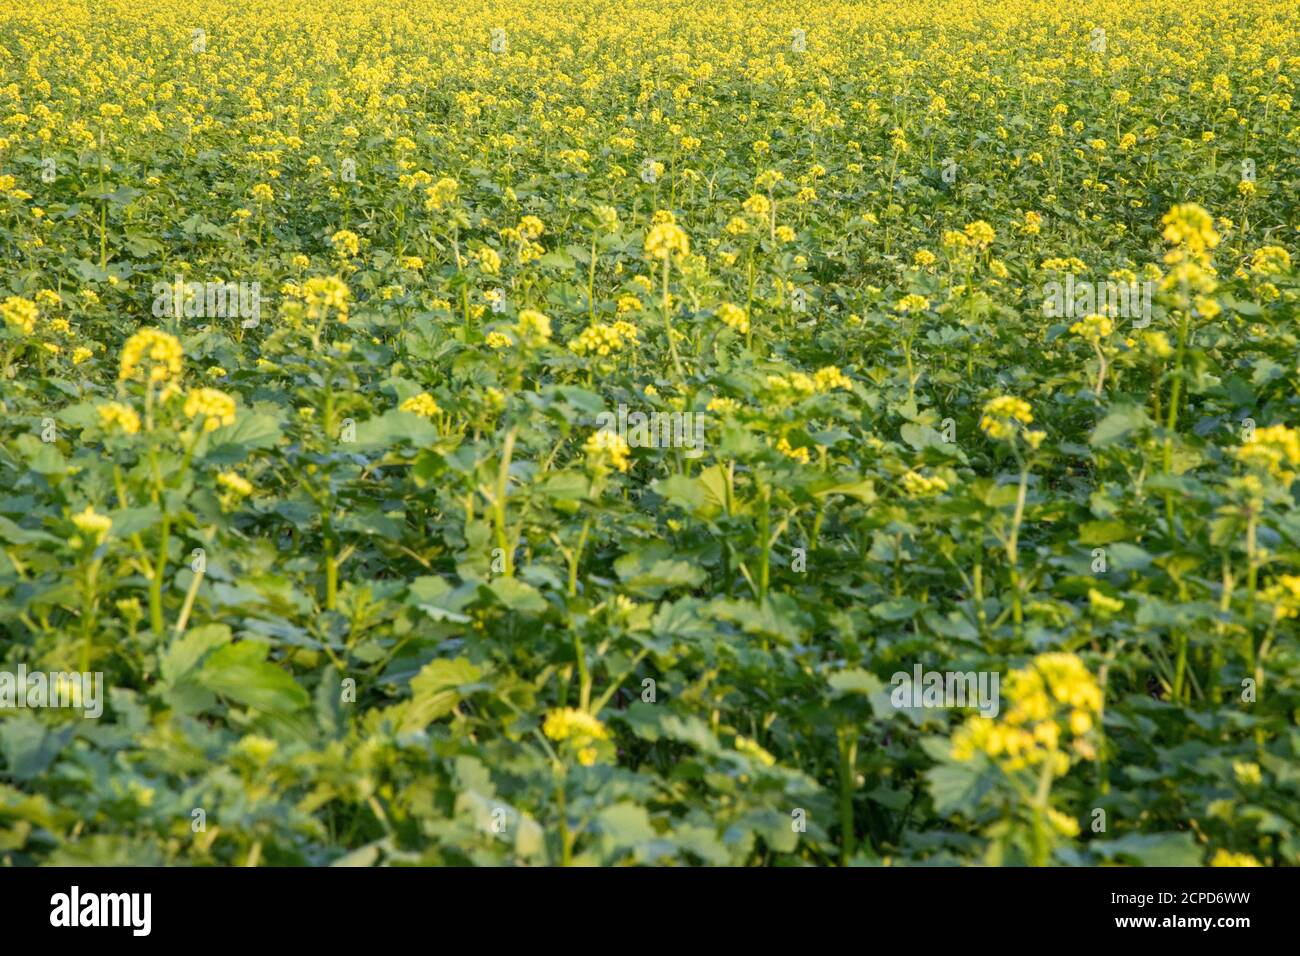 dark mustard plants in a field, yellow flowers and green leaves, brassica nigra Stock Photo